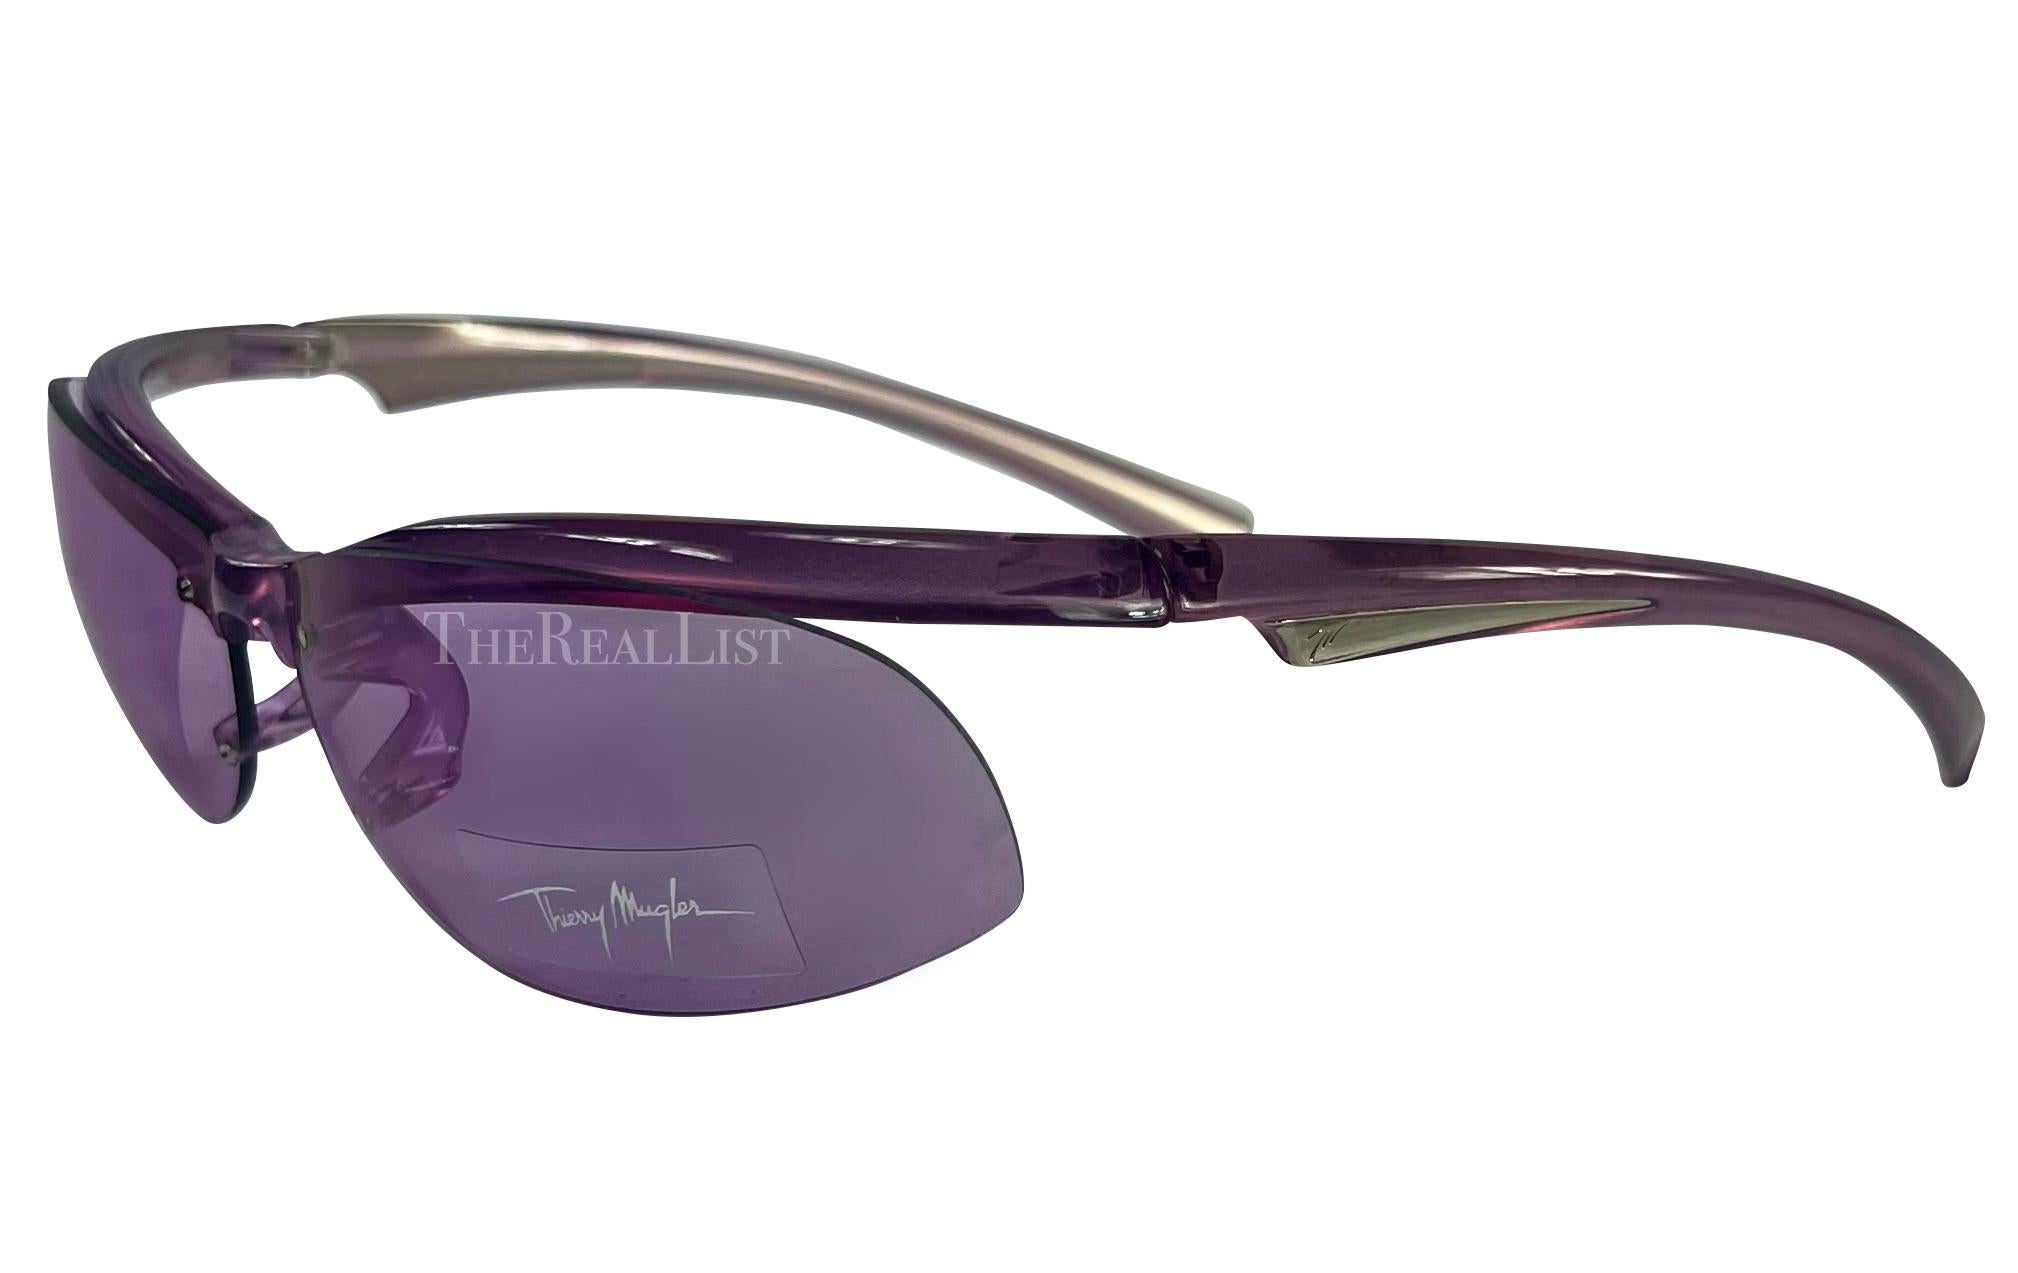 NWT 2000s Thierry Mugler Transparent Purple Metallic Sport Sunglasses In Excellent Condition For Sale In West Hollywood, CA